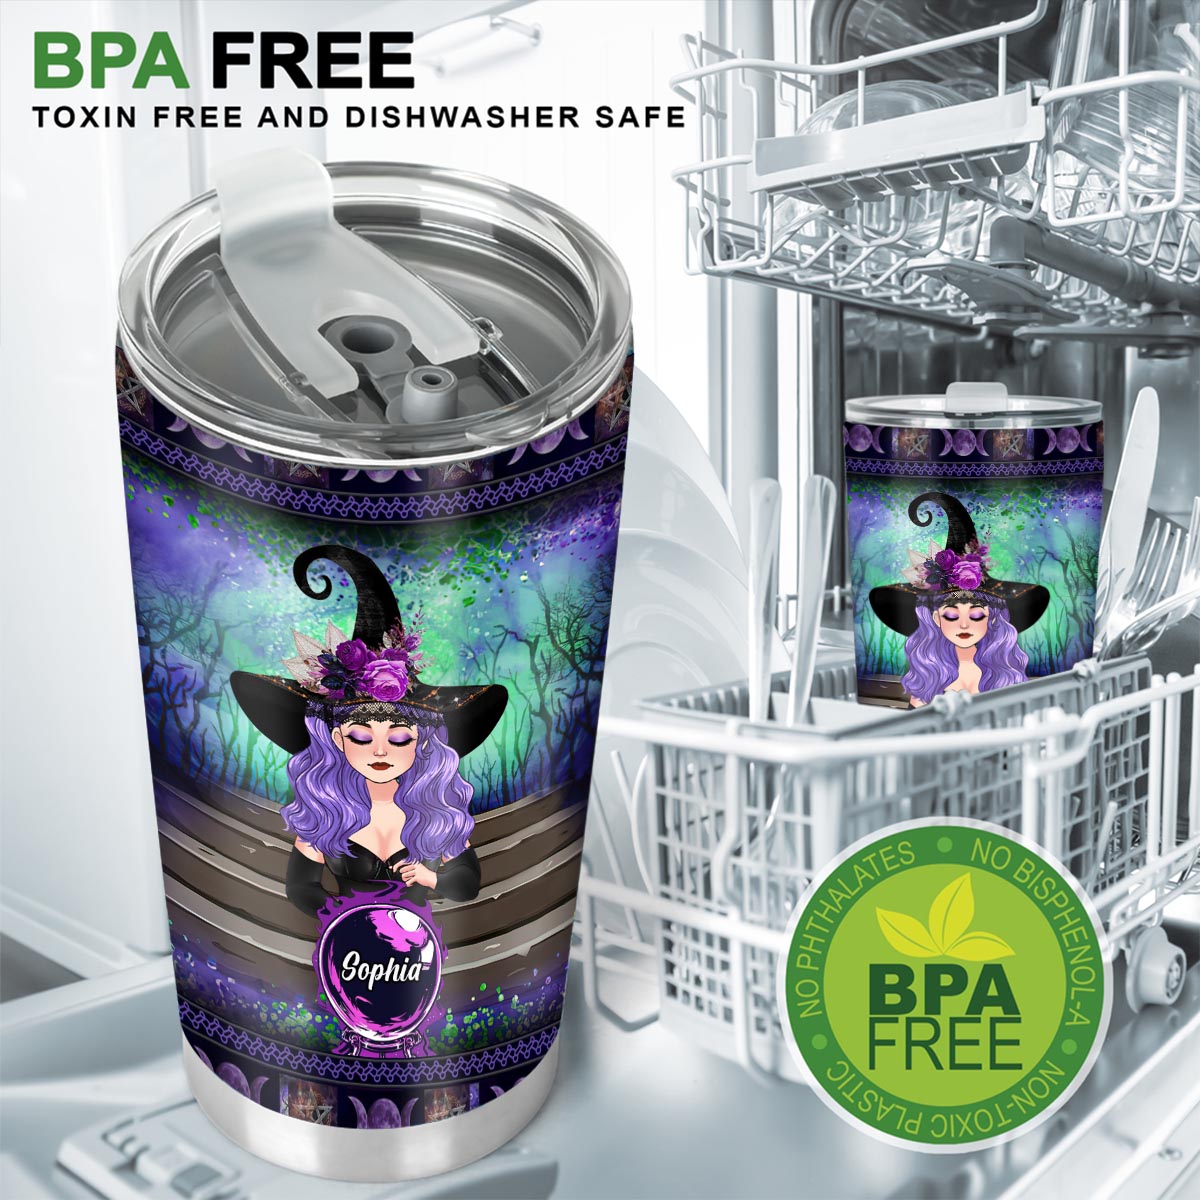 My Crystal Ball Says You're Full Of Sh*t - Personalized Witch Tumbler